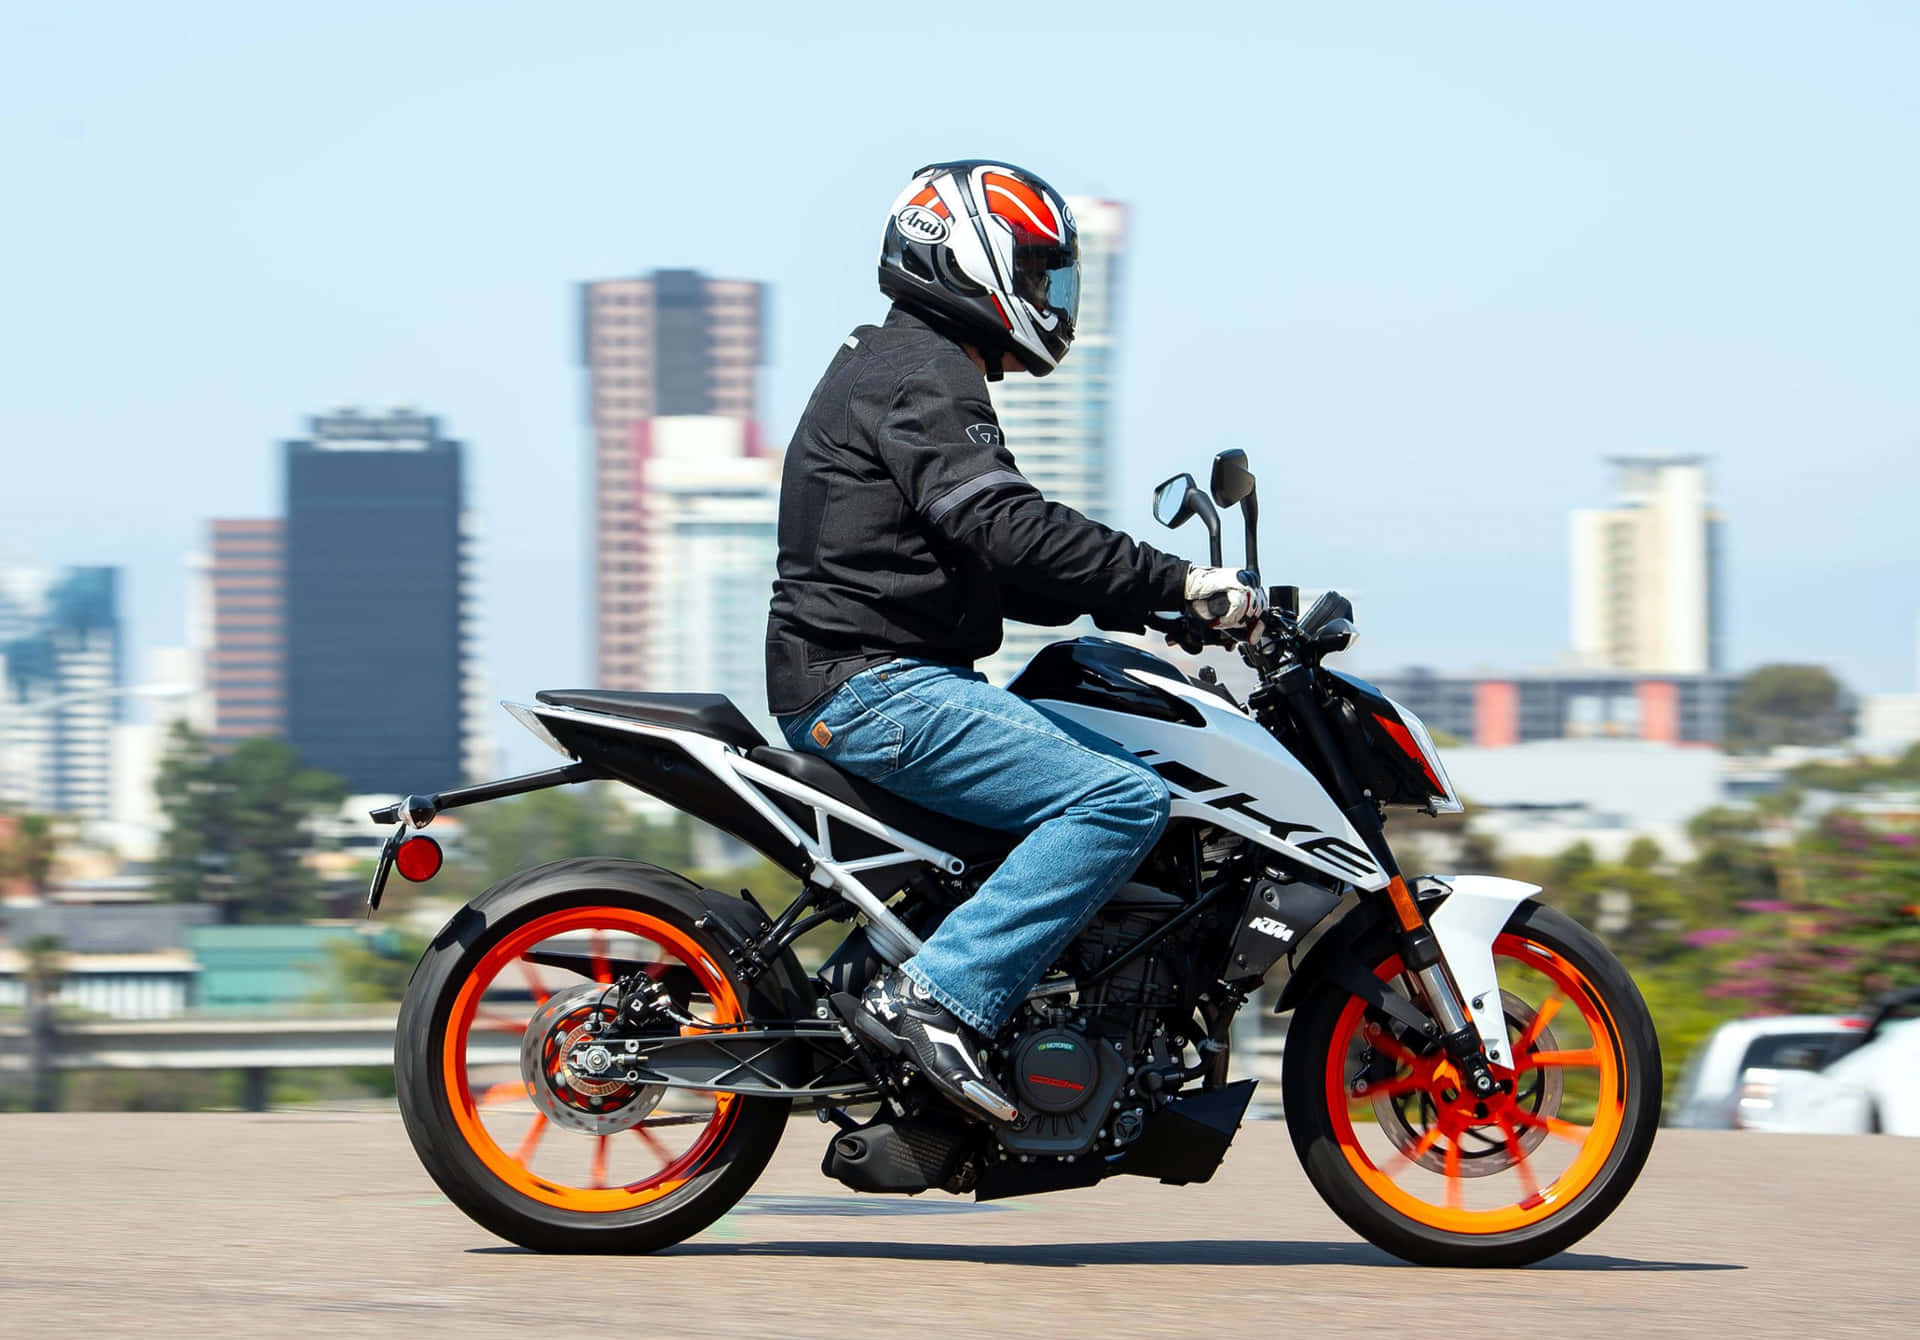 A Bold Look for a Powerful Ride: The KTM Duke